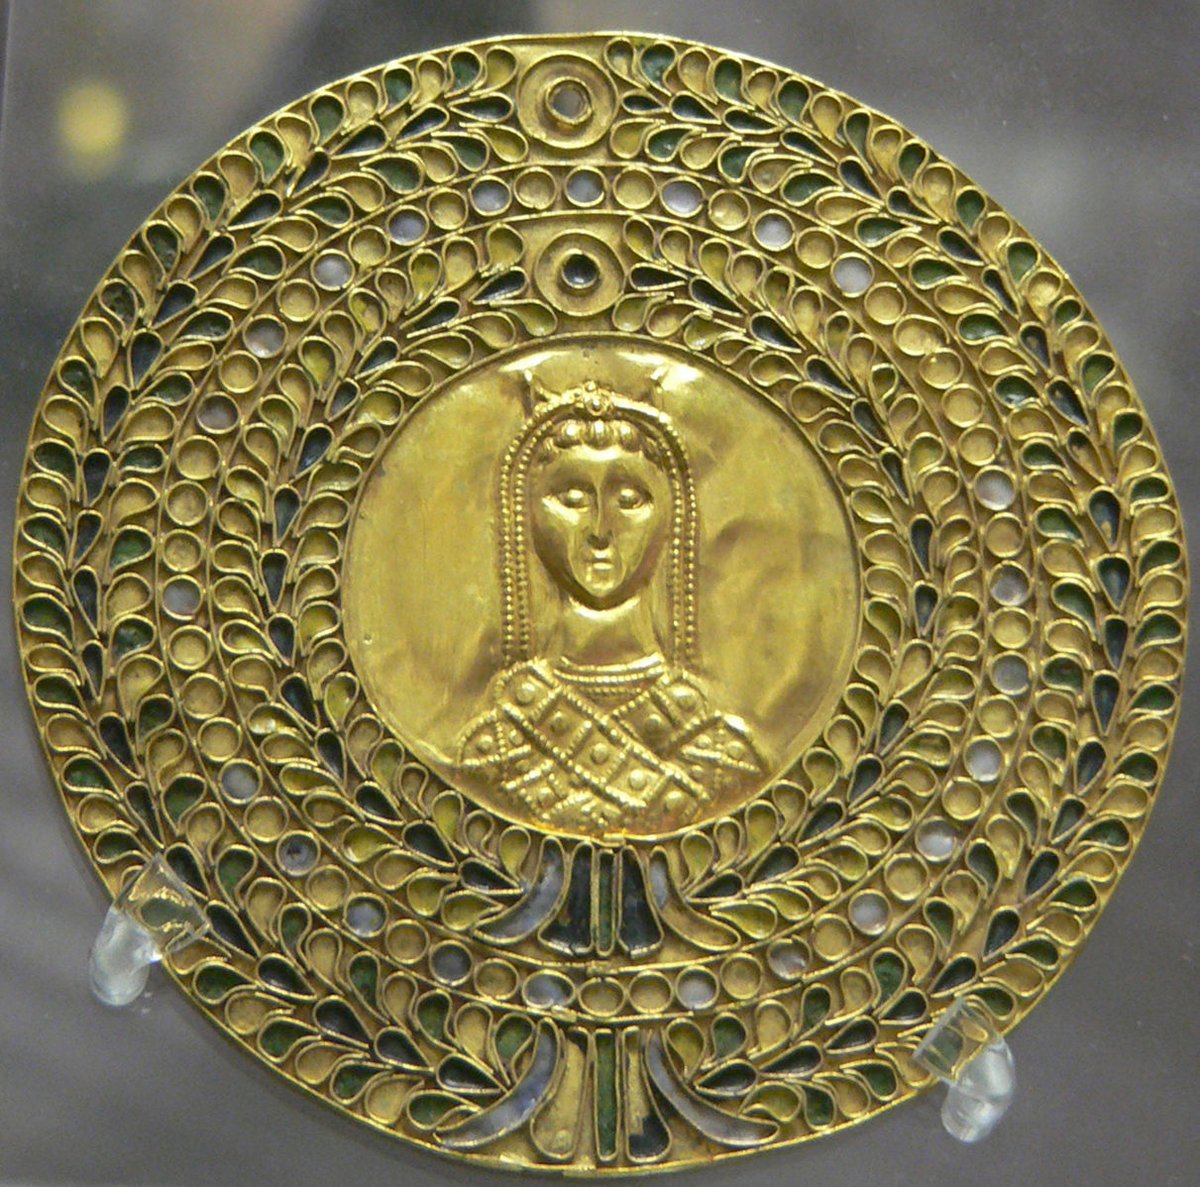 Medallion of #Roman #Empress, Licinia Eudoxia AD422–493, daughter of Eastern Roman Emperor Theodosius II & Aelia Eudocia. Her husbands were the Western Roman Emperors Valentinian III & Petronius Maximus, & later Huneric.  Their son Hilderic was king of the Vandals 523 to 530.